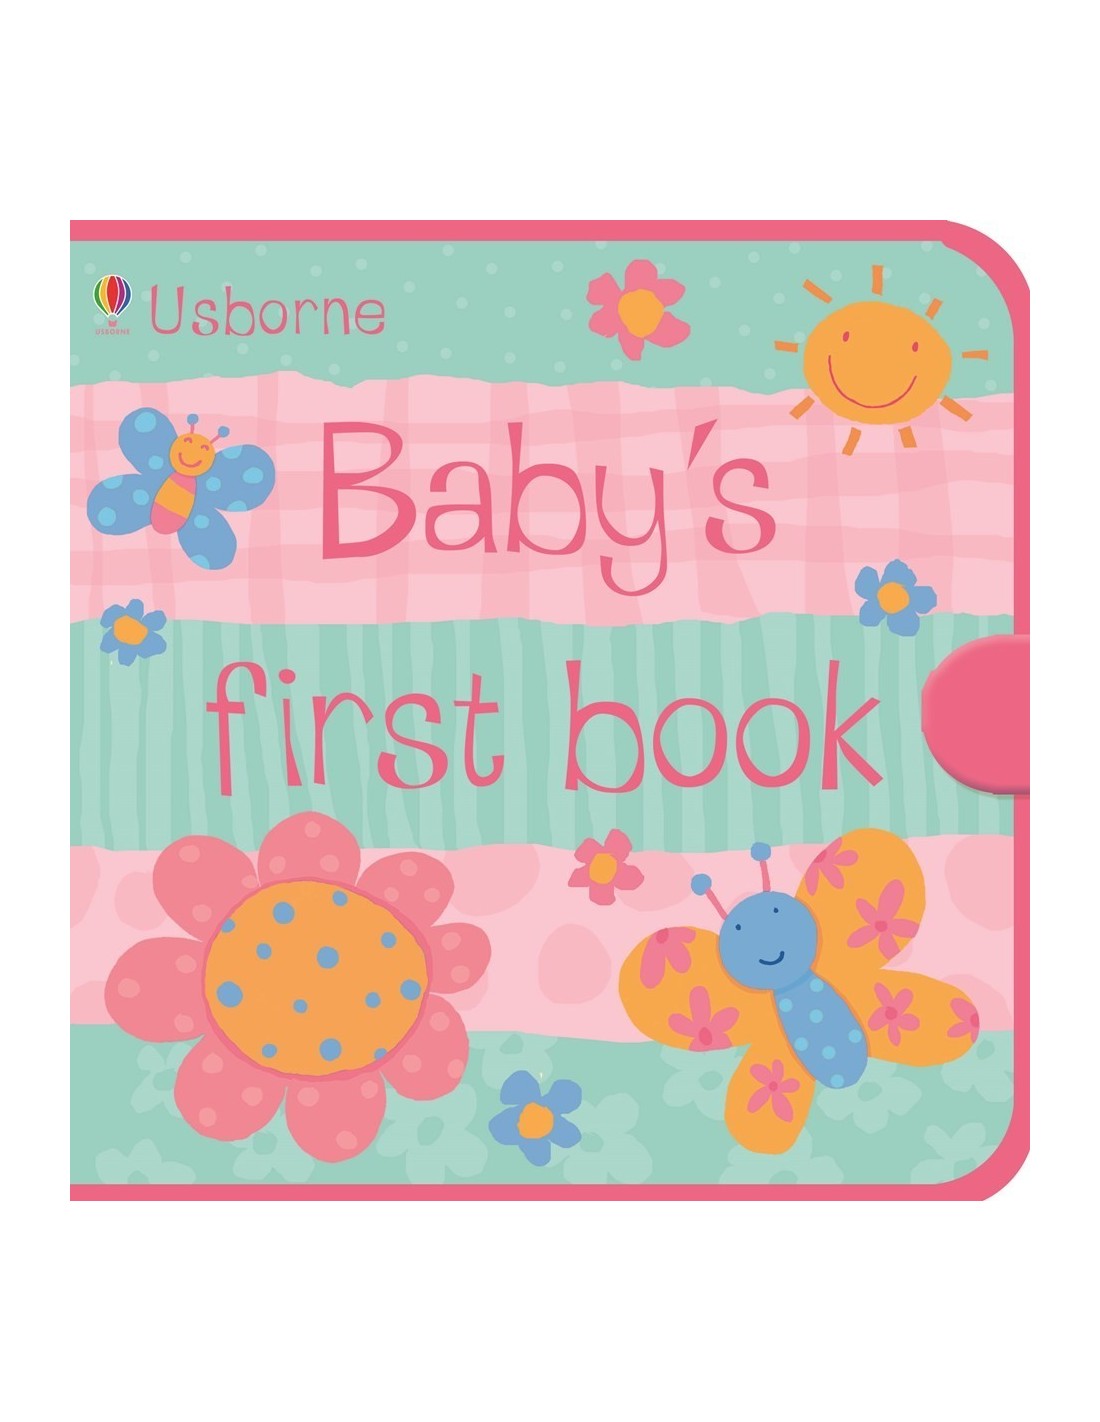 Baby's first book (pink)